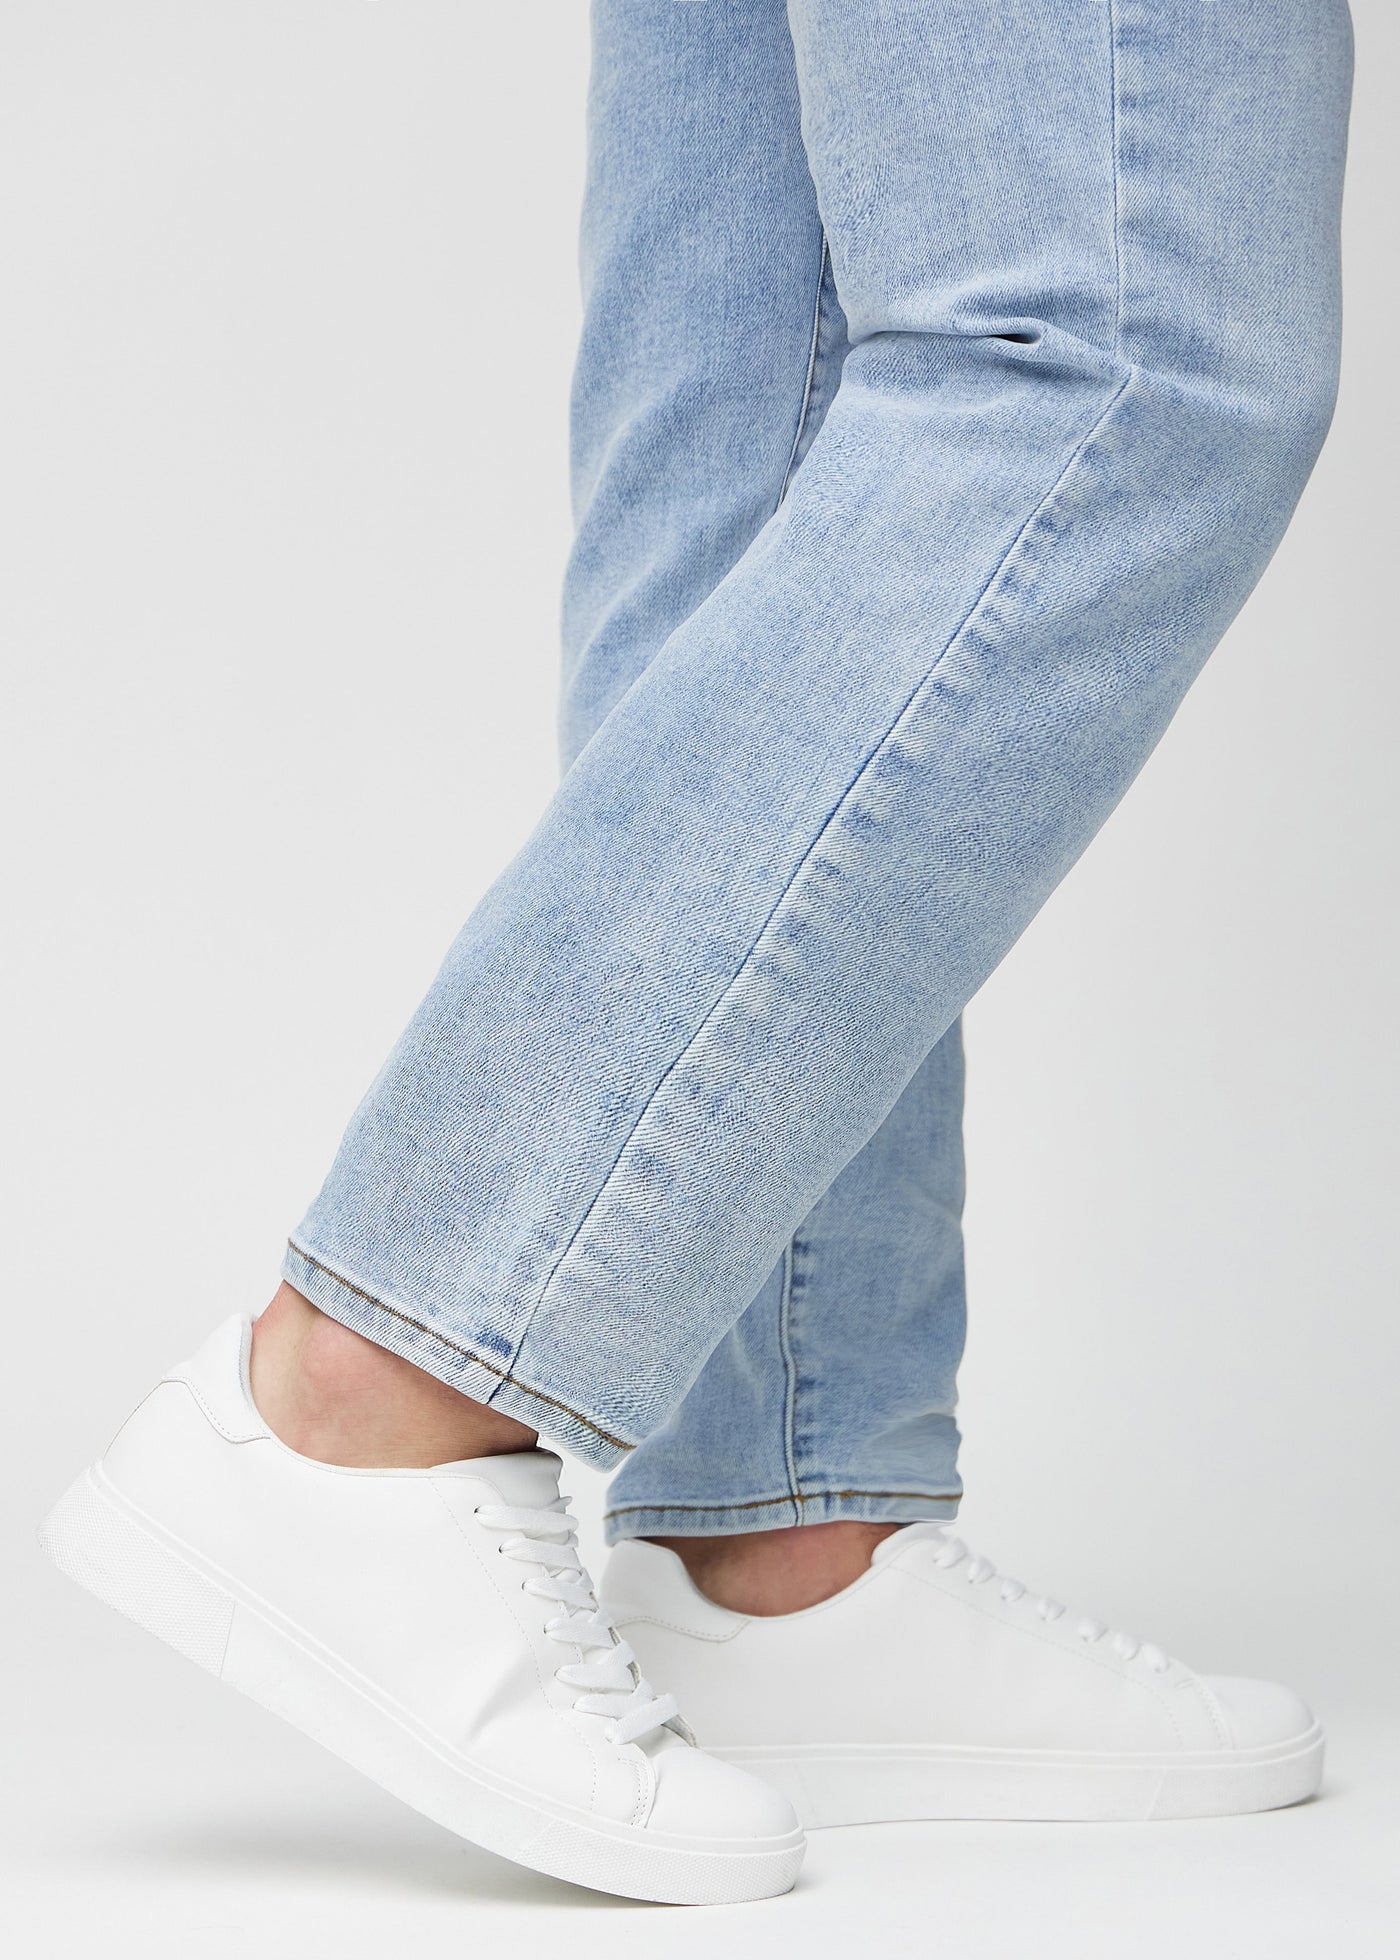 Perfect Jeans - Regular - Waves™